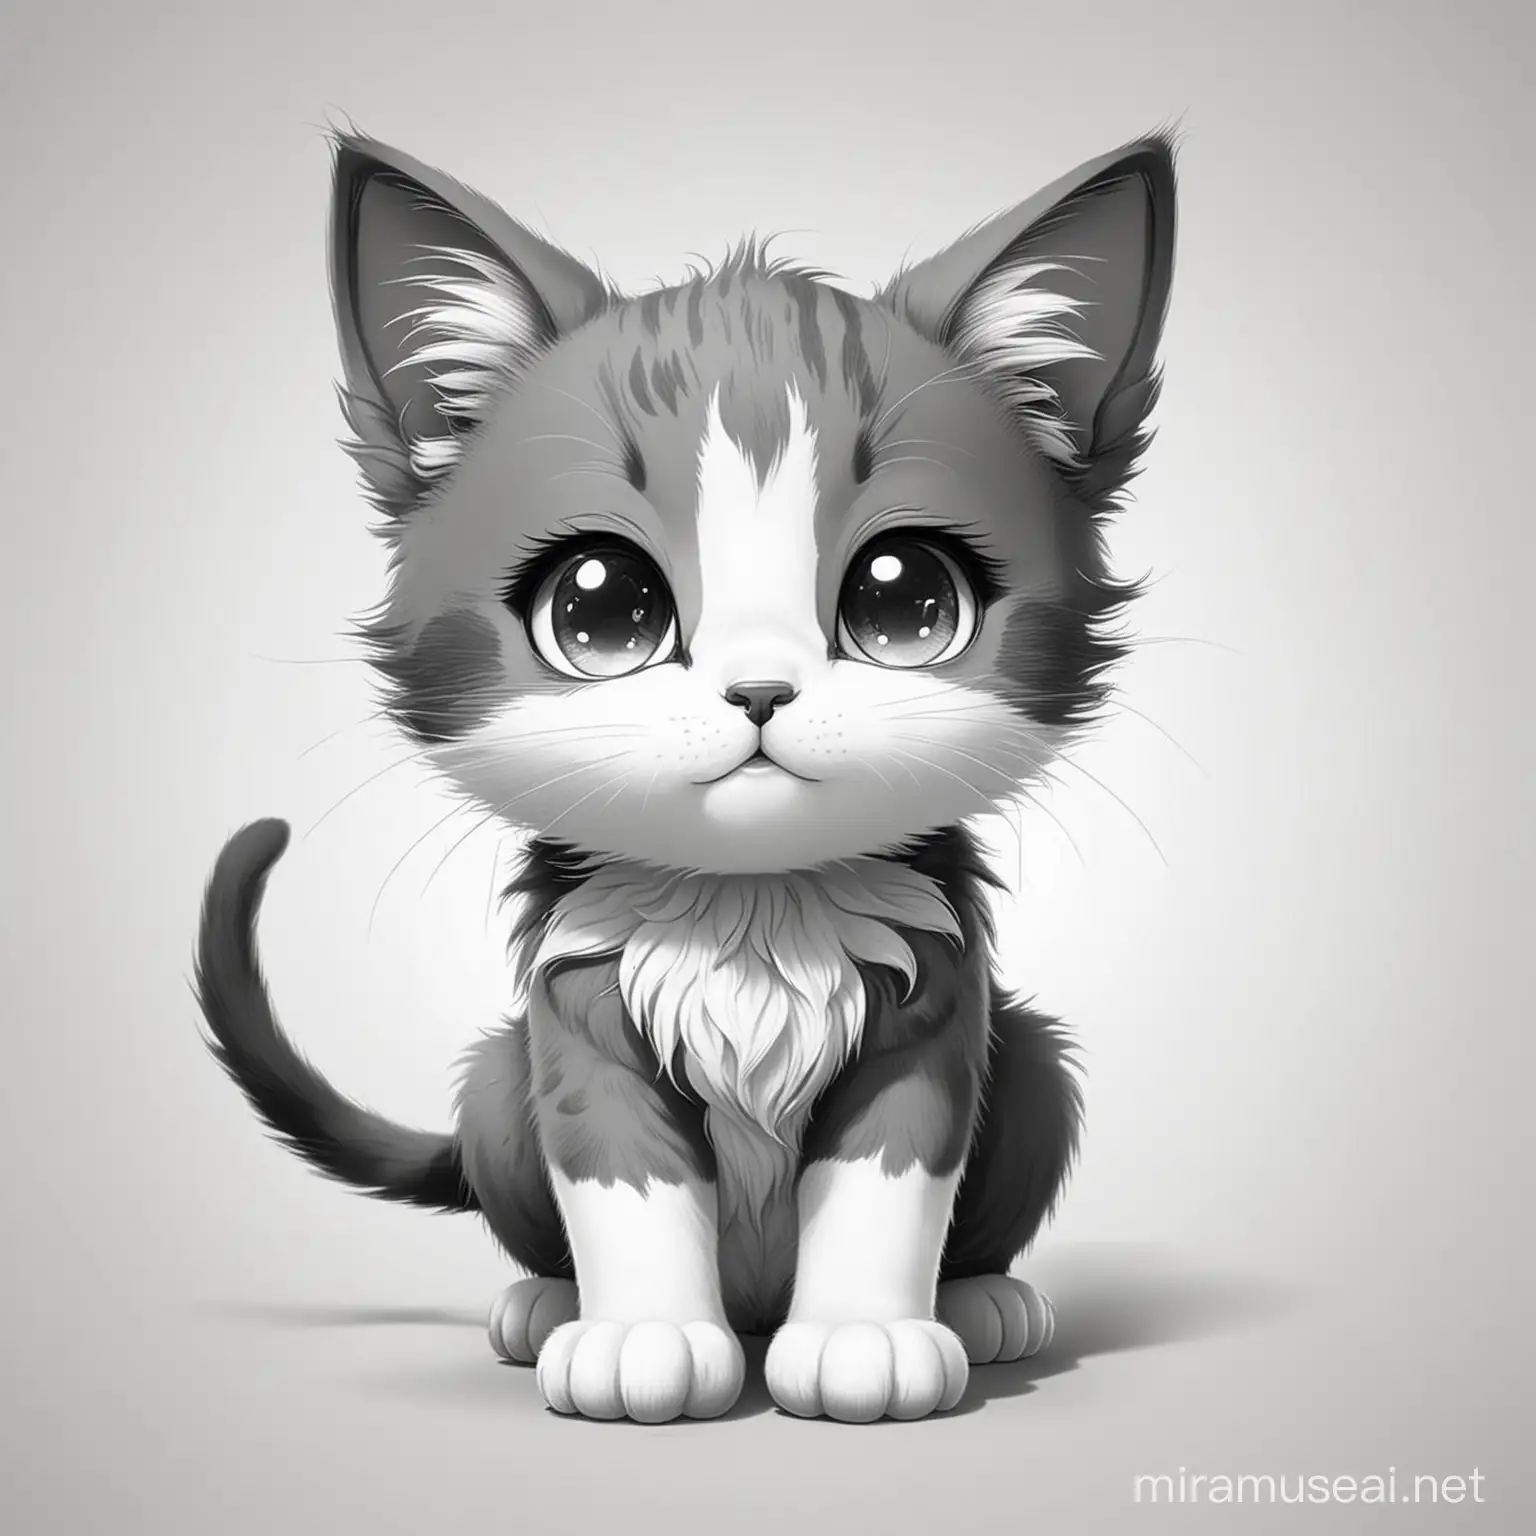 A cute kitten anime cartoon,black and white, isolated on white background
